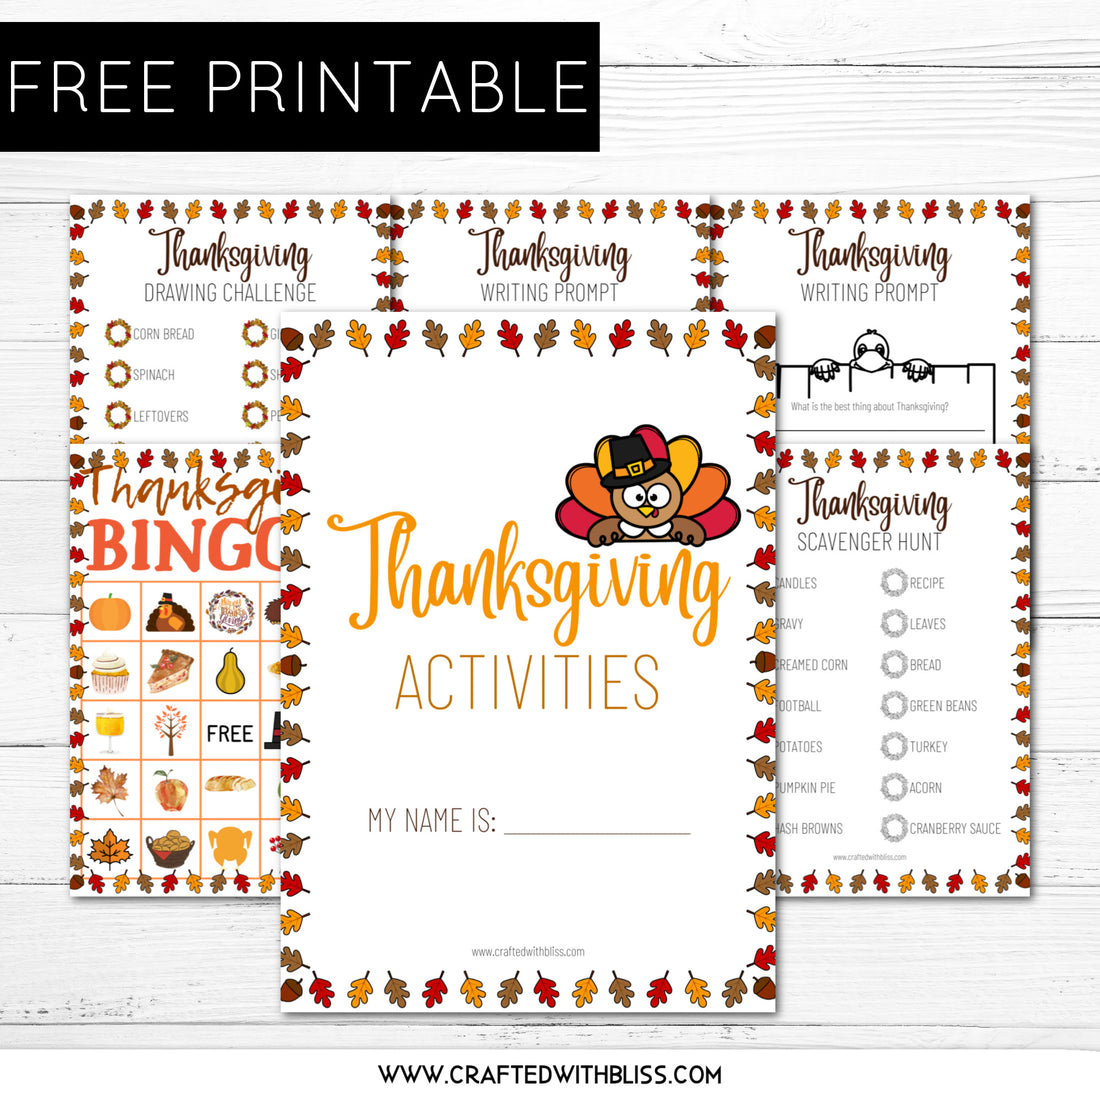 FREE Thanksgiving Printable For Families